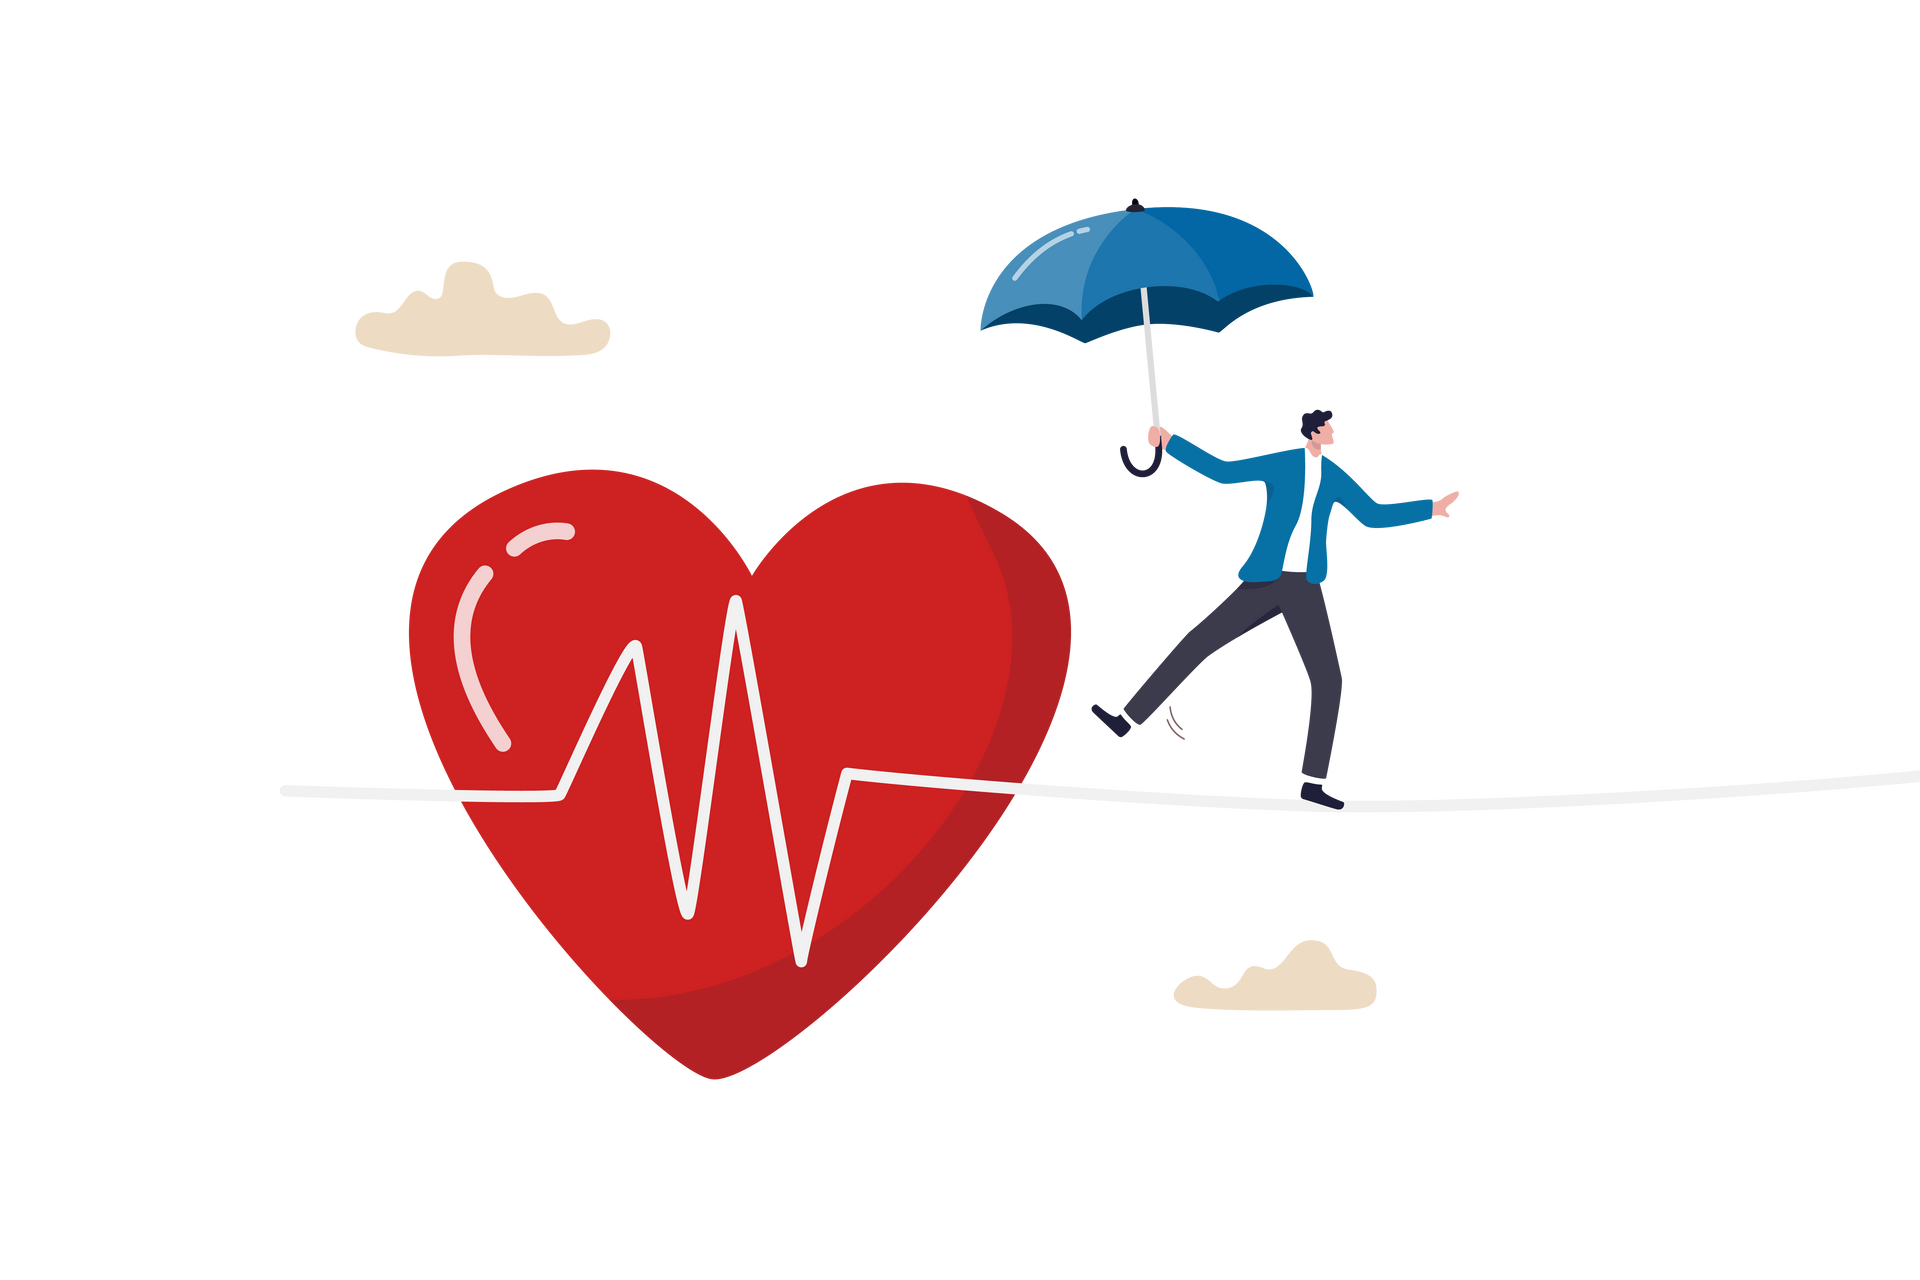 A man is holding an umbrella while walking on a tightrope next to a heart.